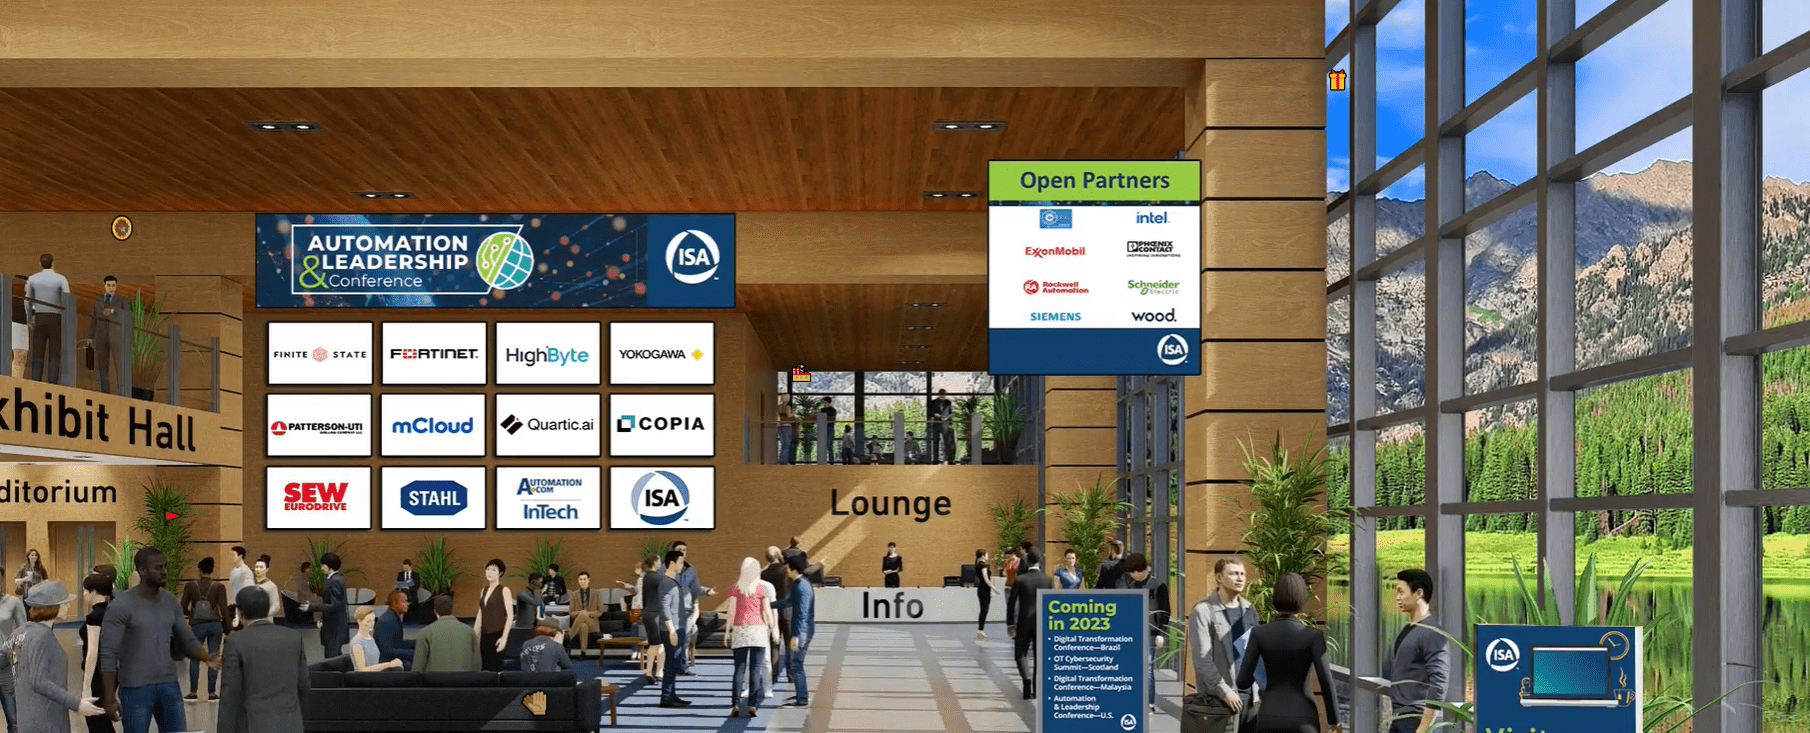 3D lobby of ISA Automation & Leadership Conference